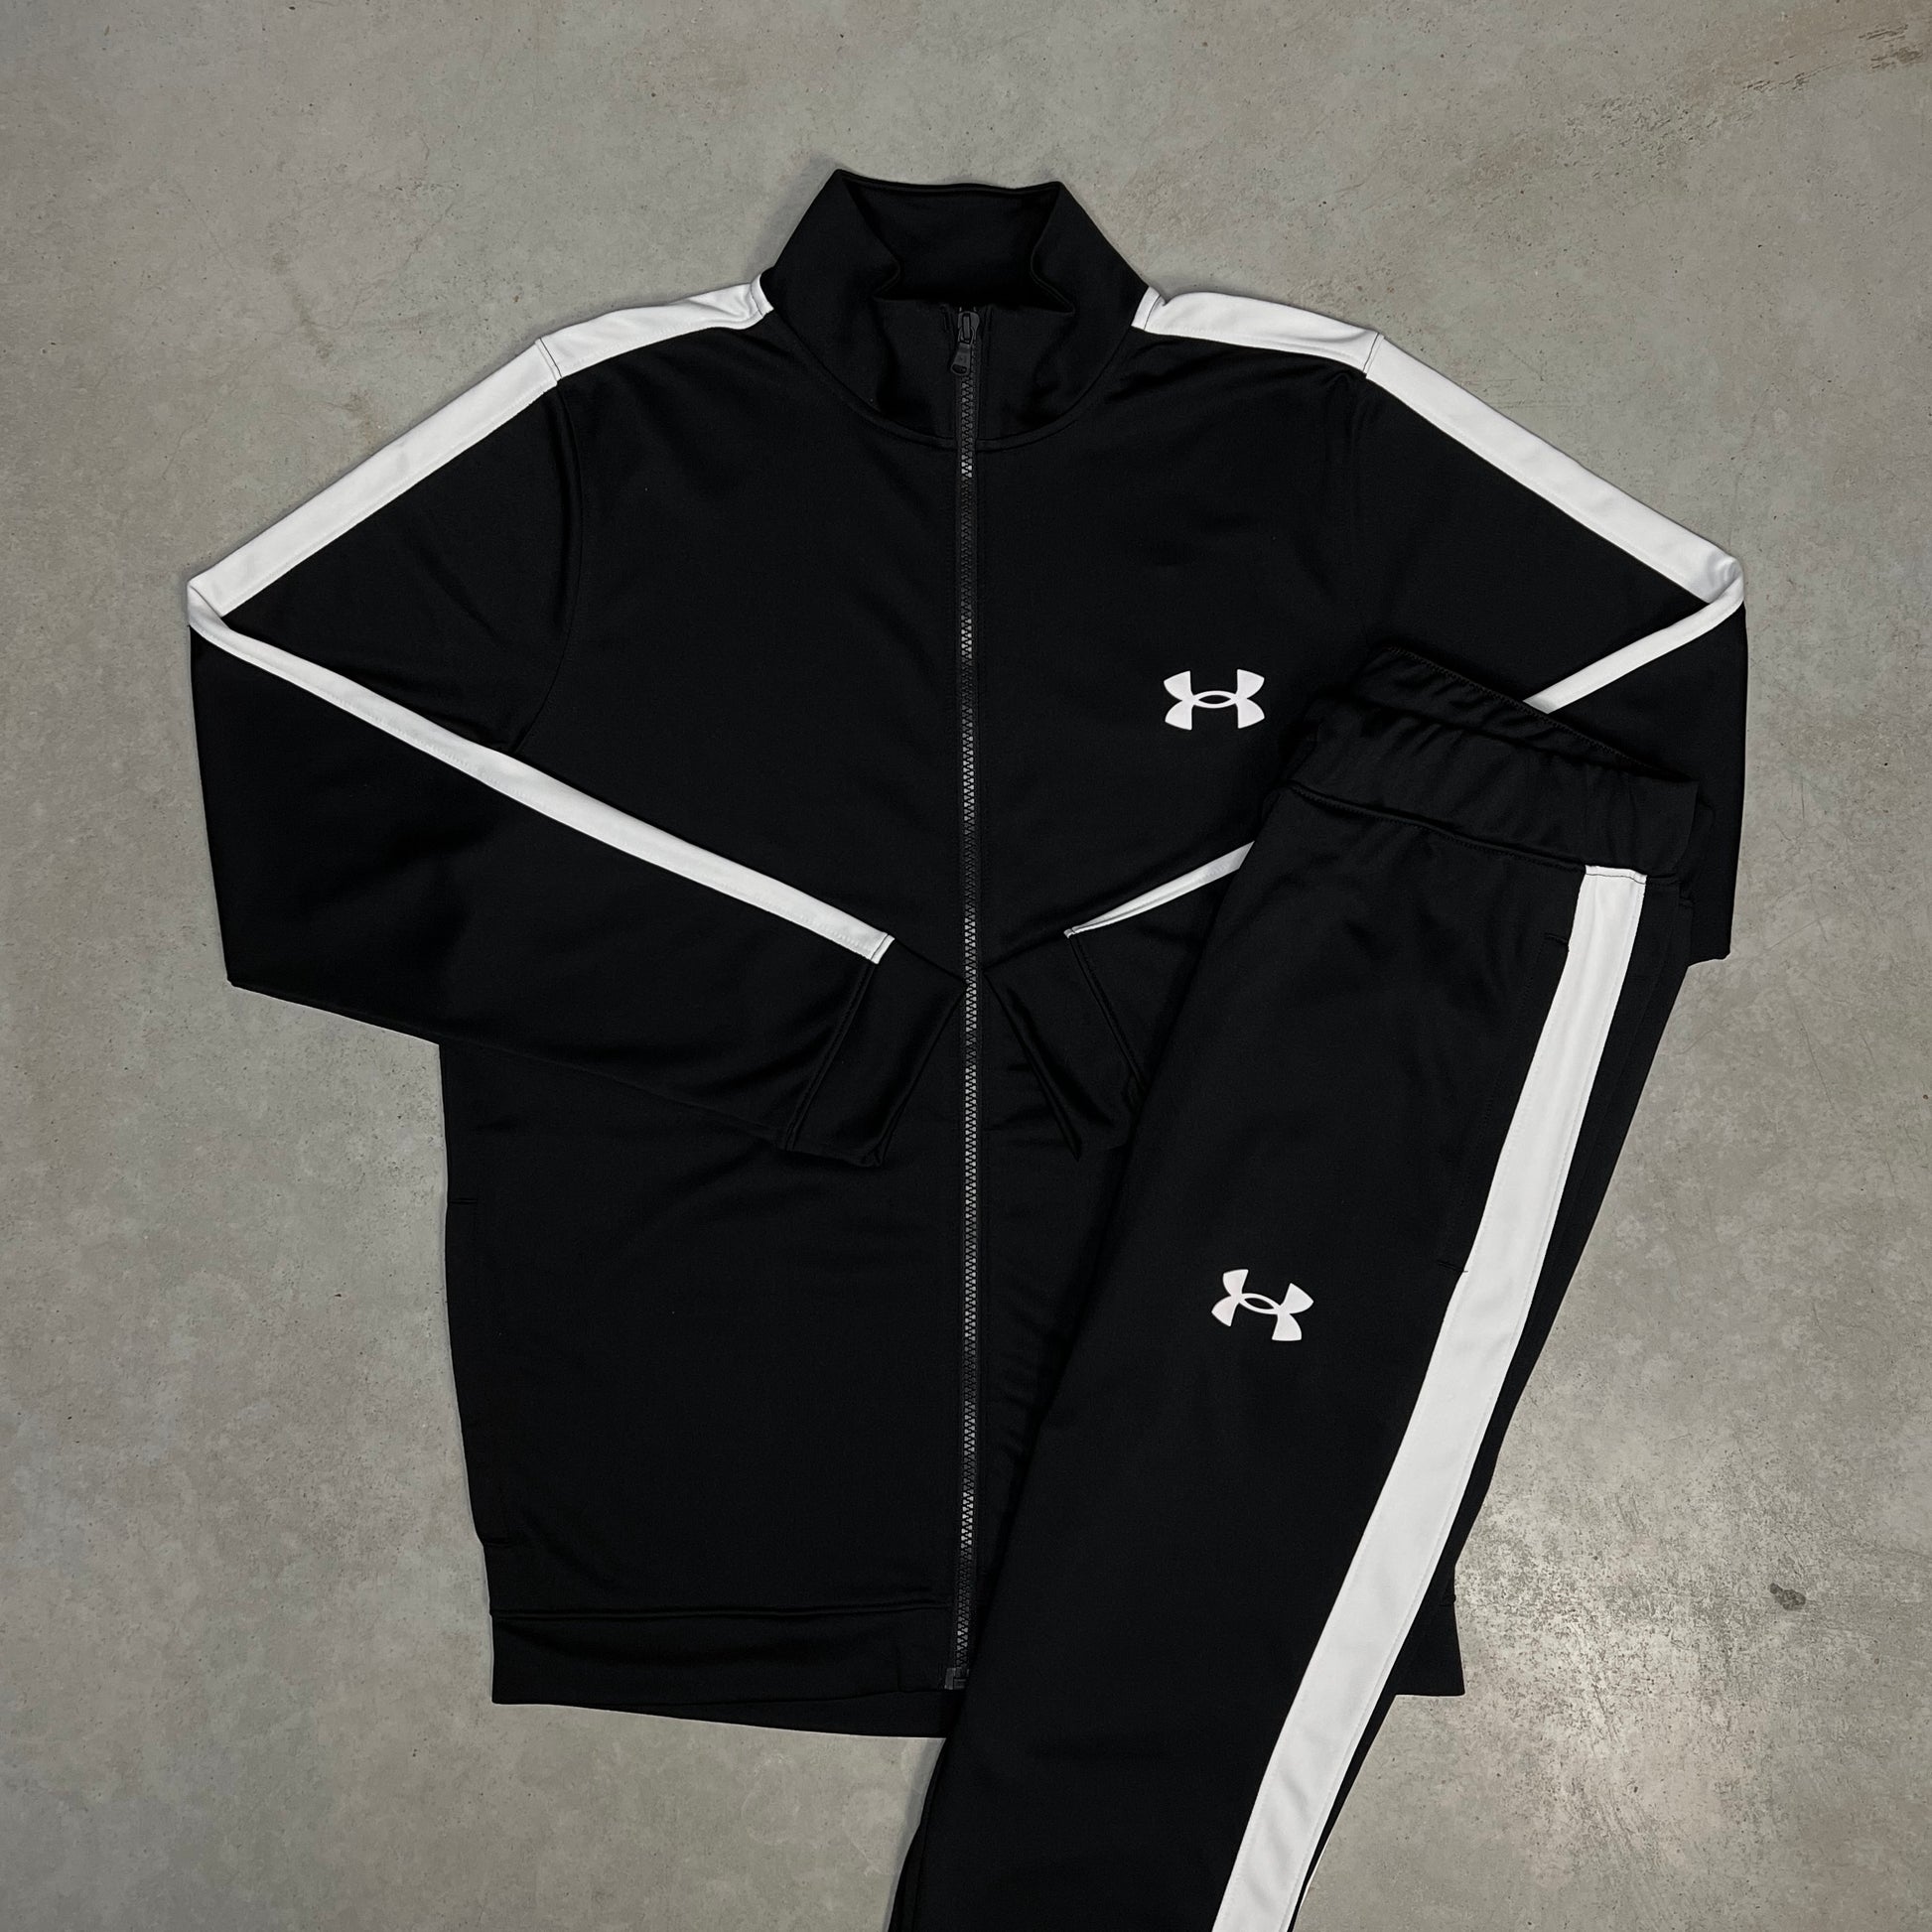 Under Armour – Black/White Tracksuit 24motions